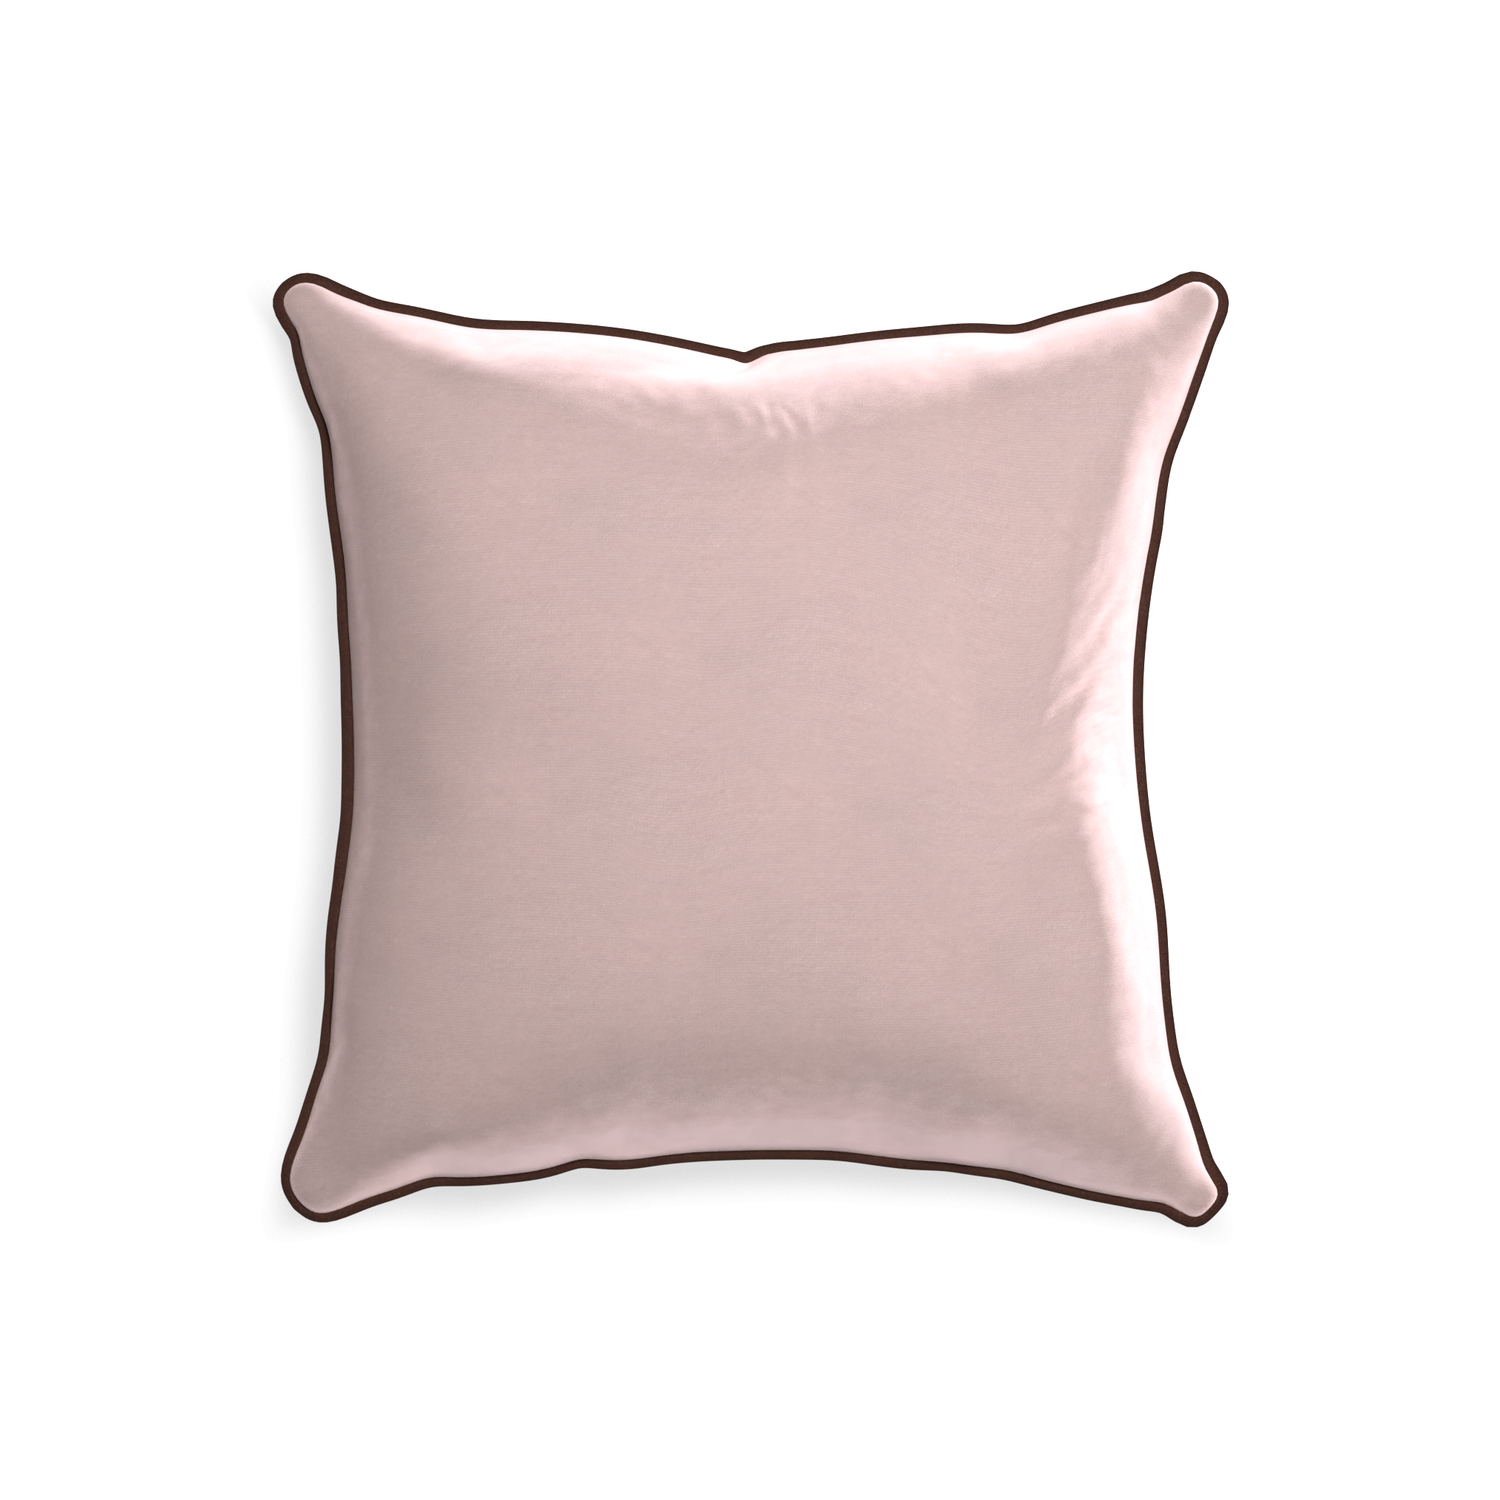 square light pink velvet pillow with brown piping 